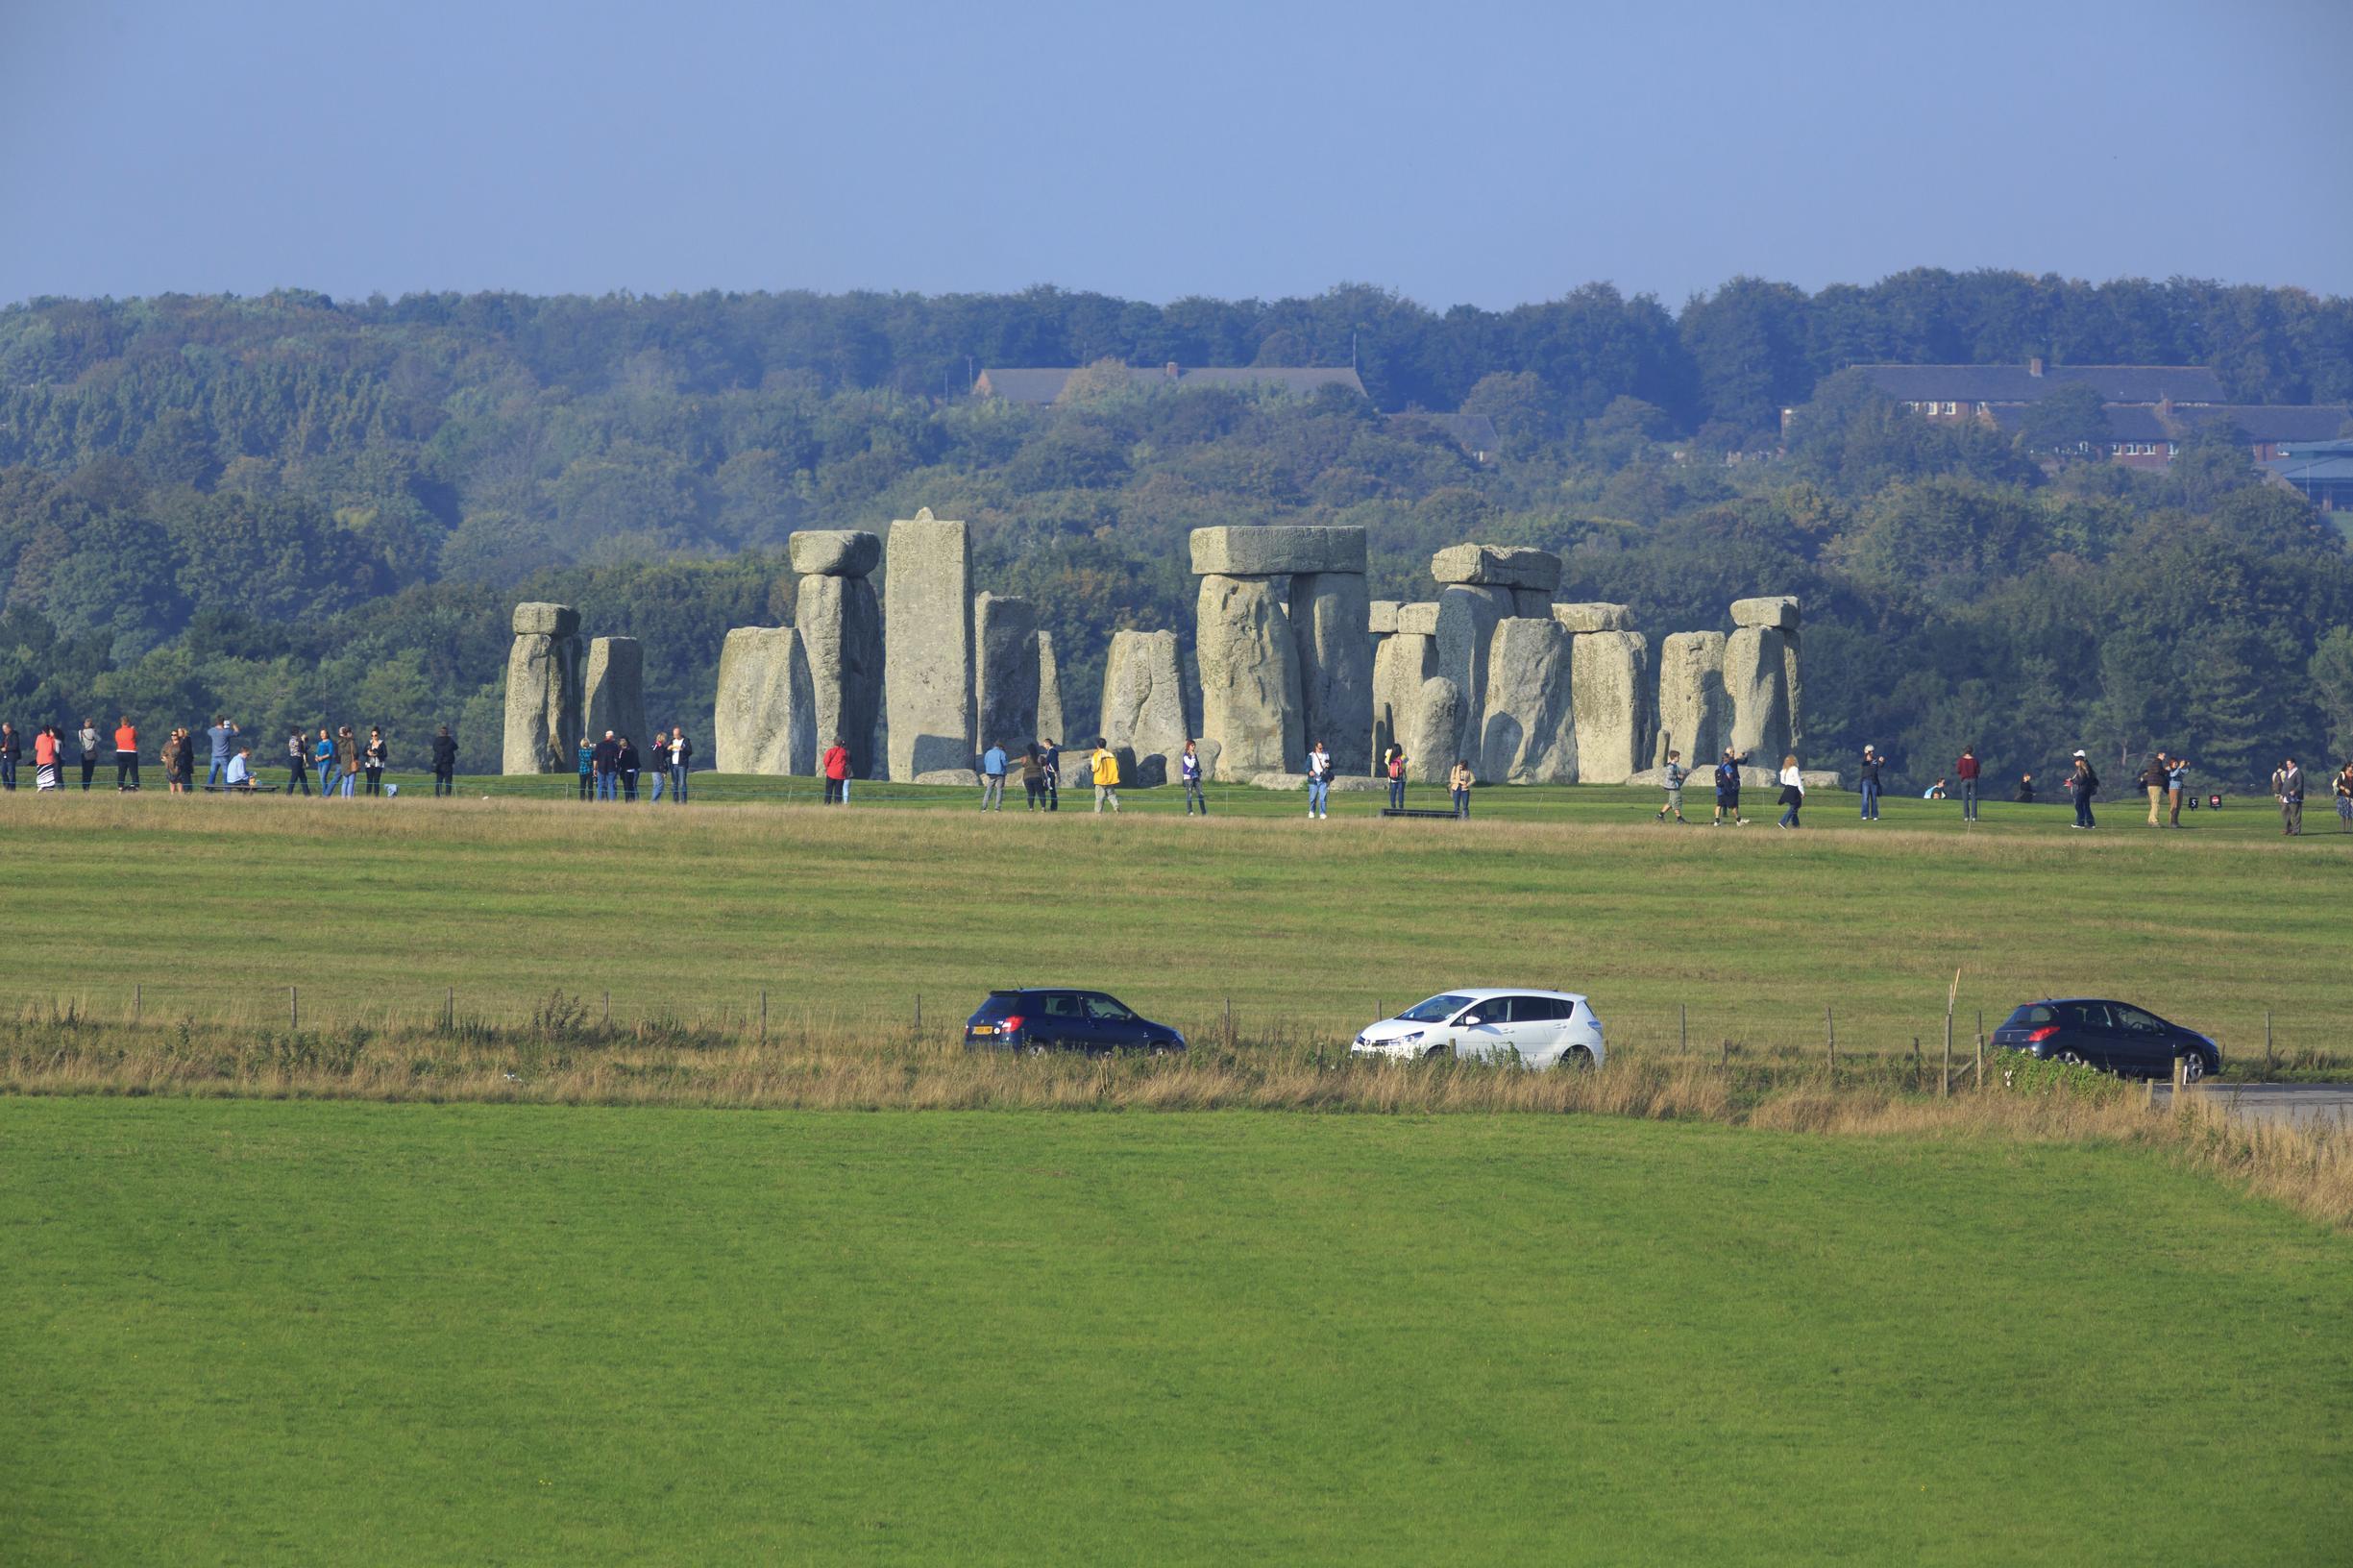 Stonehenge: the proposed road scheme could bring international disgrace upon Britain, says Kate Freeman